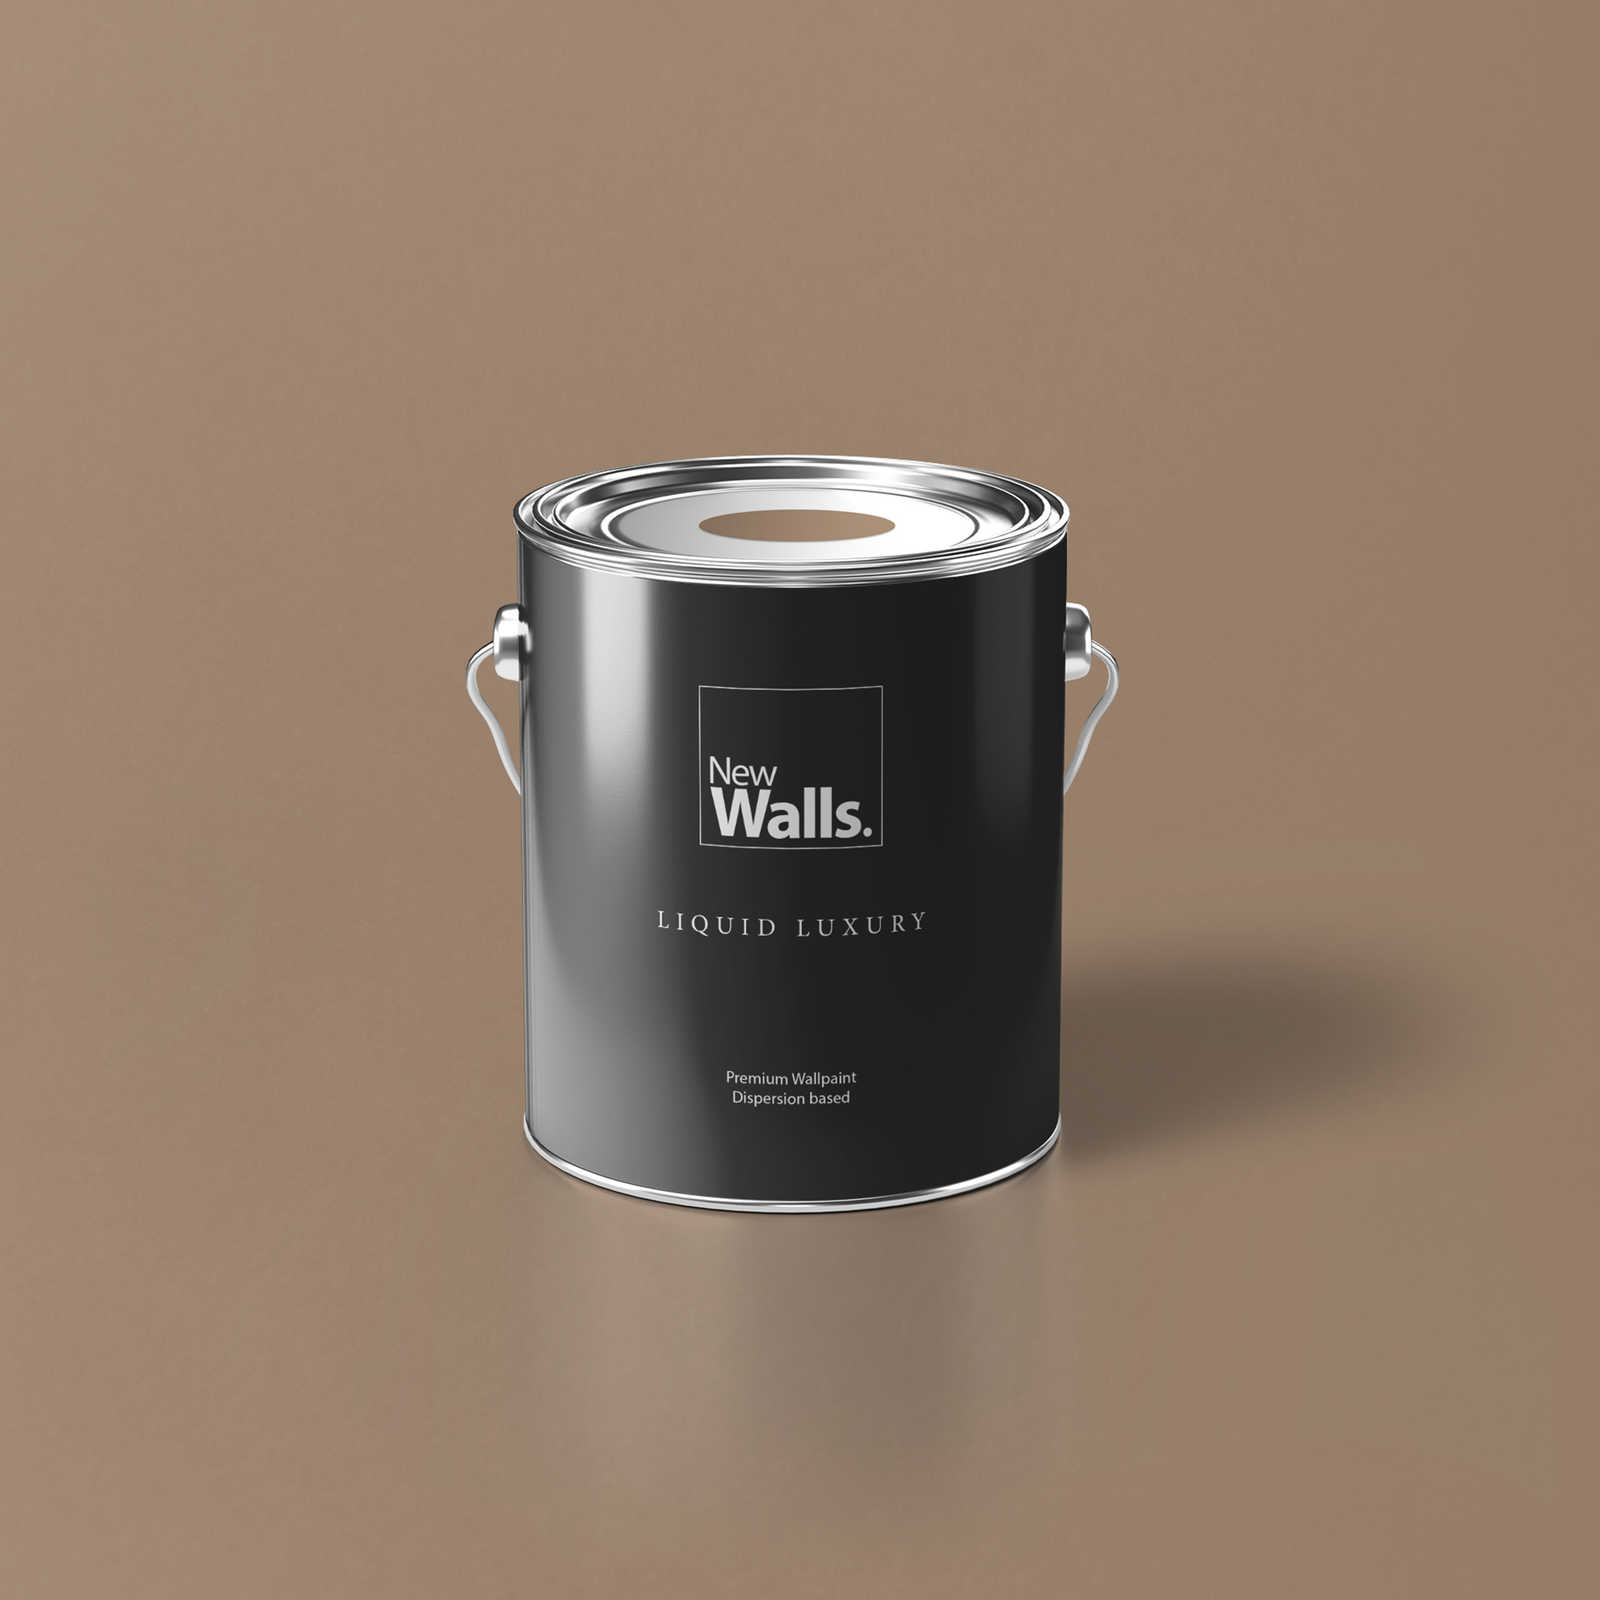 Premium Wall Paint Earthy Light Brown »Modern Mud« NW718 – 2.5 litre
